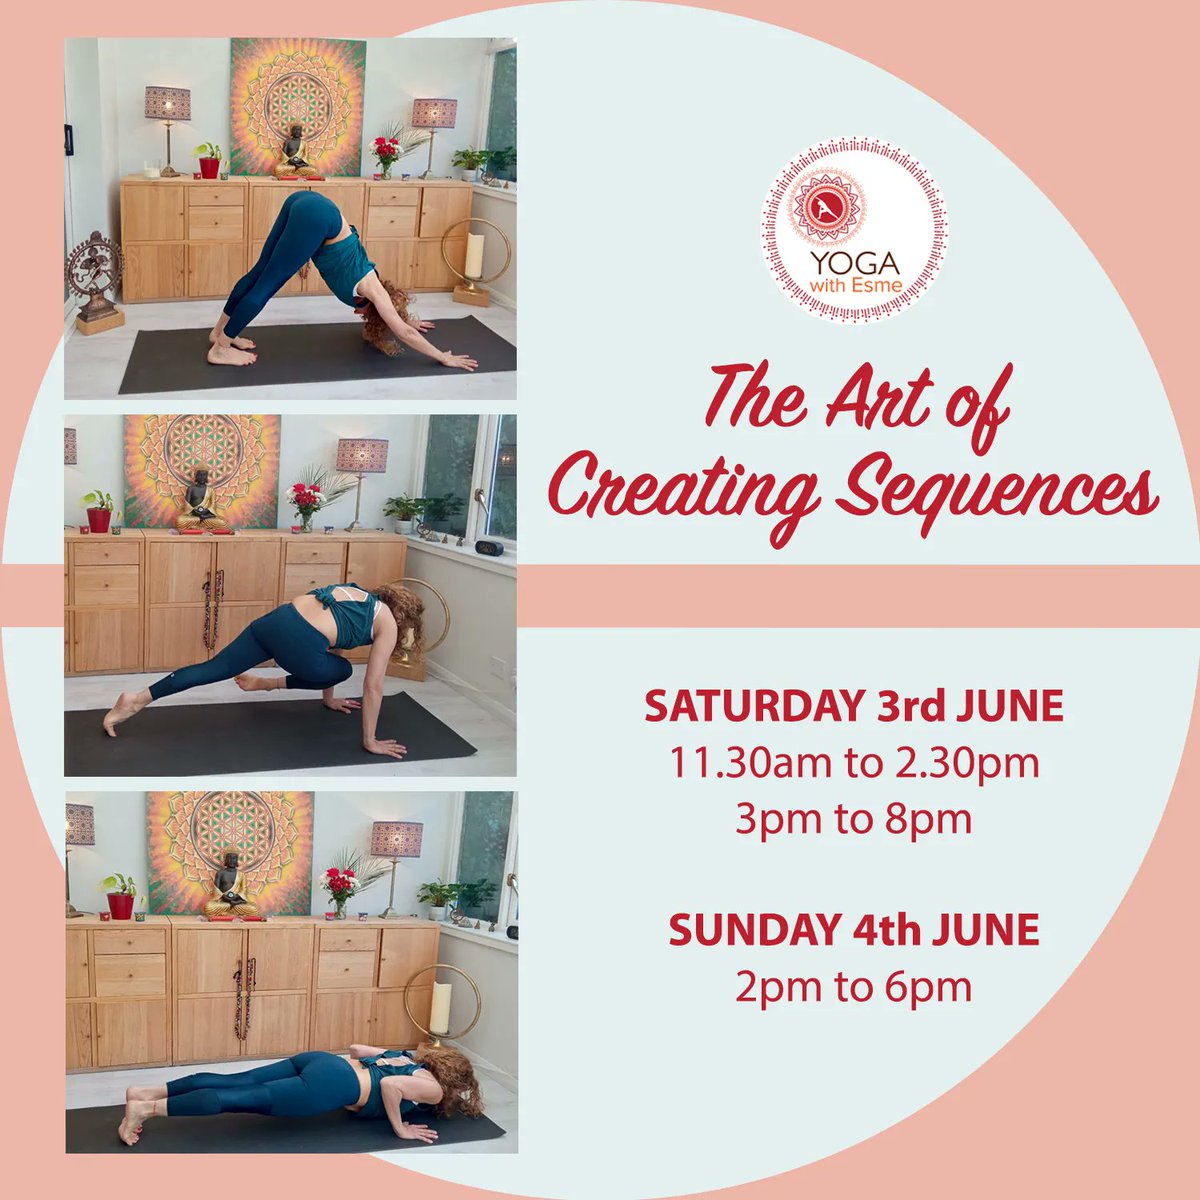 For more information, head over to yogawithesme.com/service/art-of…  And don't forget: ‼️BOOK TODAY AND GET 15% OFF‼️ #CreatingSequences #Sequencing #TheArtOfCreatingSequences #VinyasaFlow #VinyasaKrama #VinyasaYoga #TeacherTraining #TeachingYoga #Yogi #Training